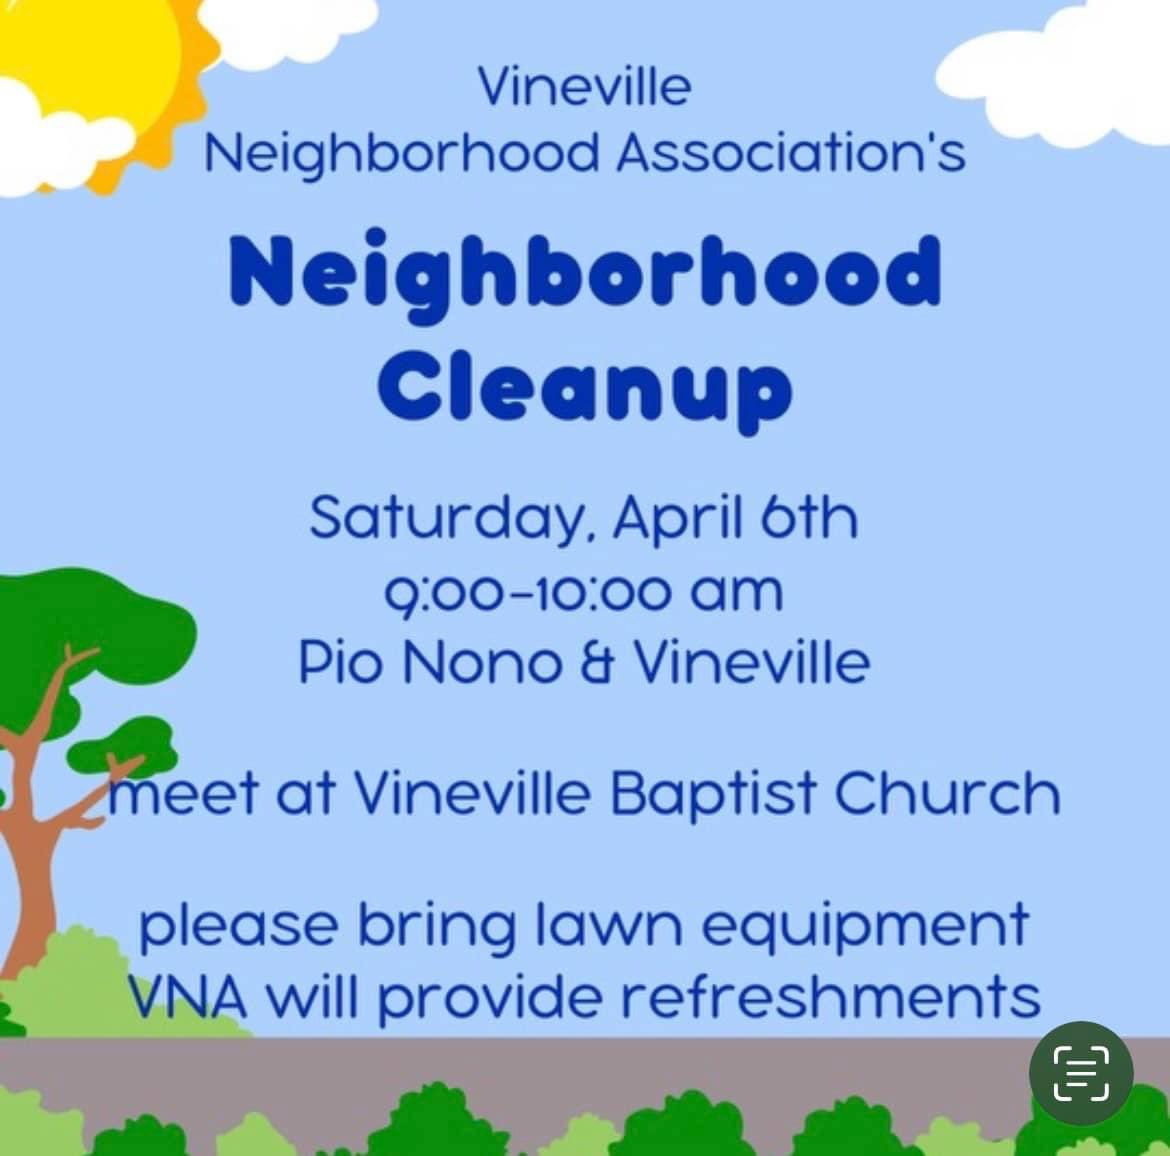 Loved seeing all the smiling faces at the Vineville Neighborhood Association clean up yesterday!